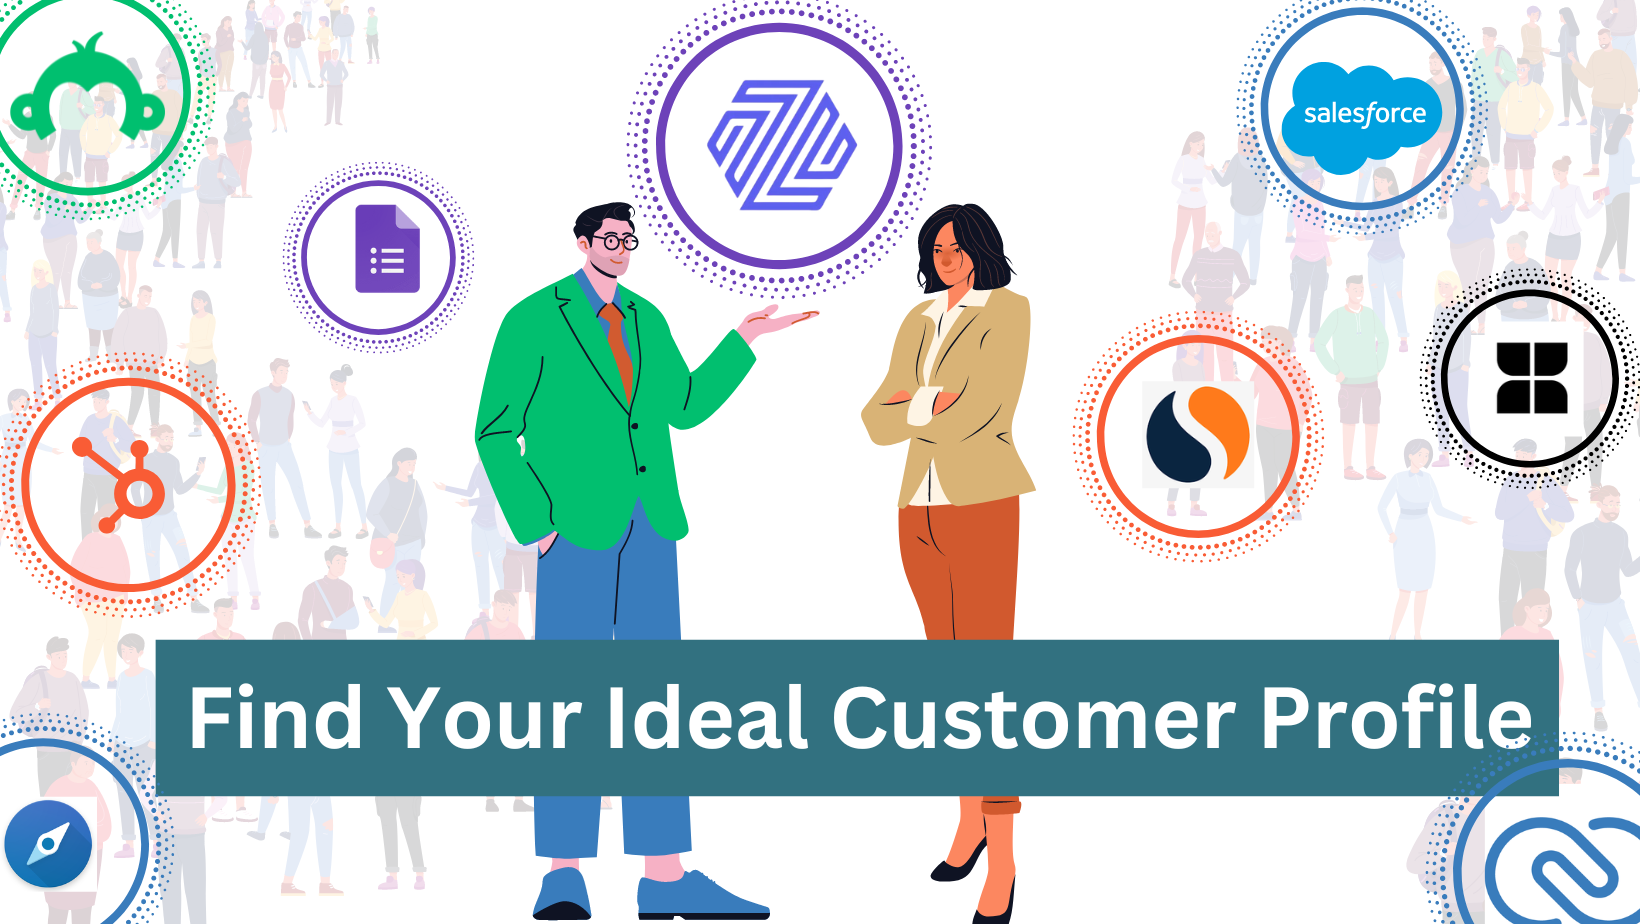 How to find your Ideal Customer Profile?